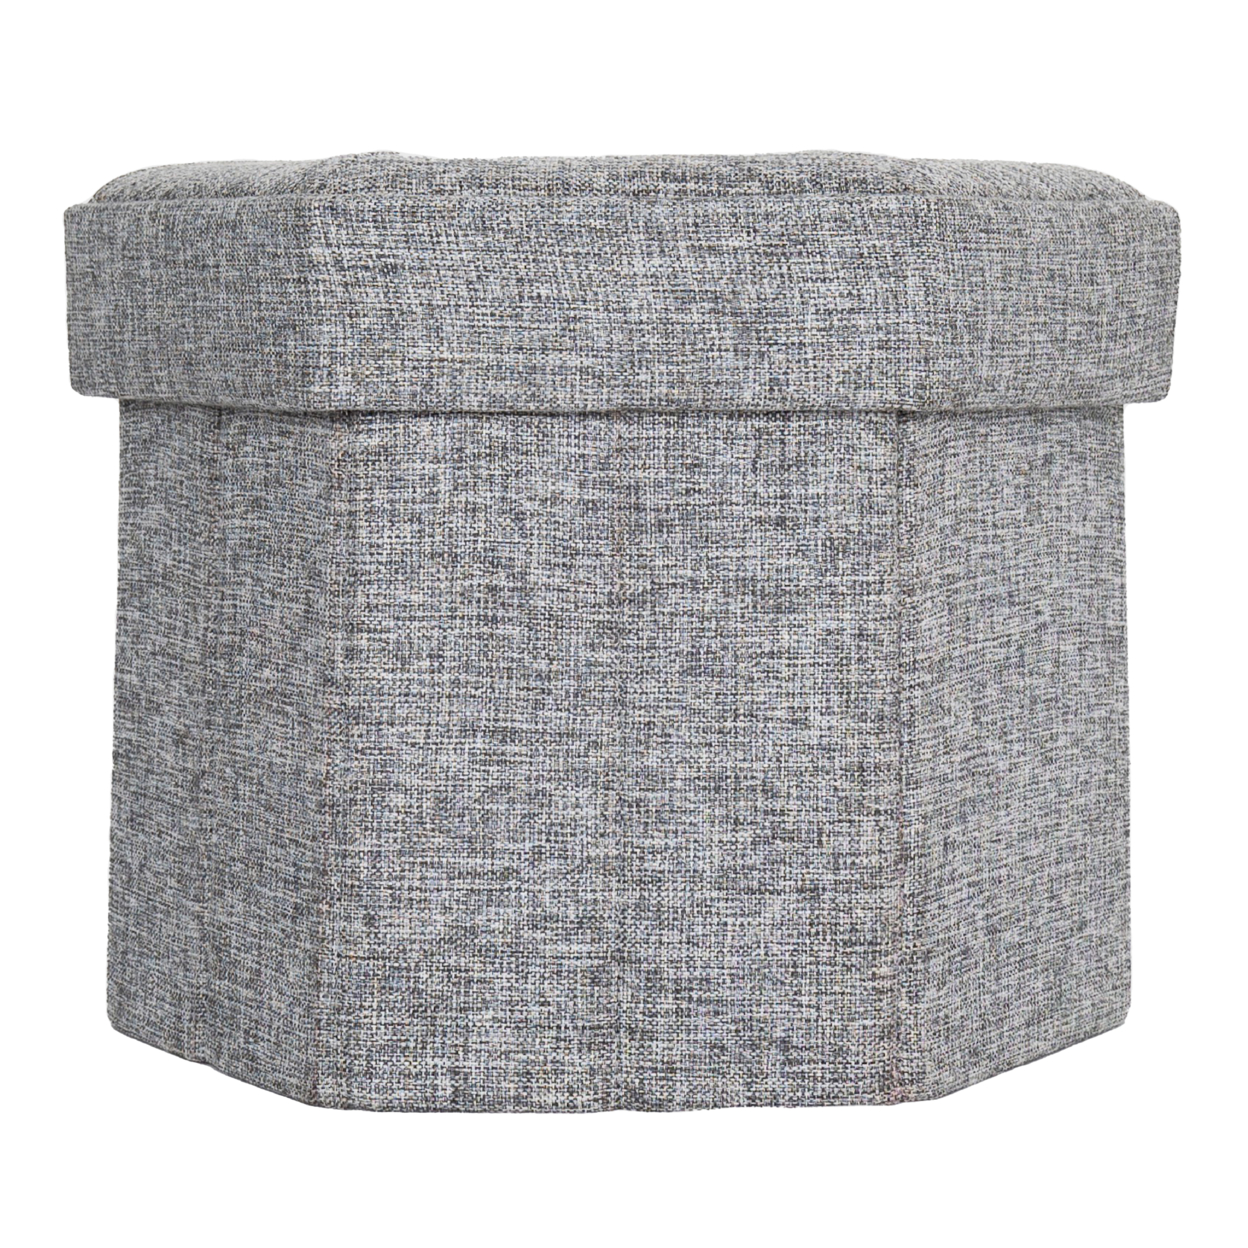 Decorative Grey Foldable Hexagon Ottoman For Living Room, Bedroom, Dining, Playroom Or Office - Small